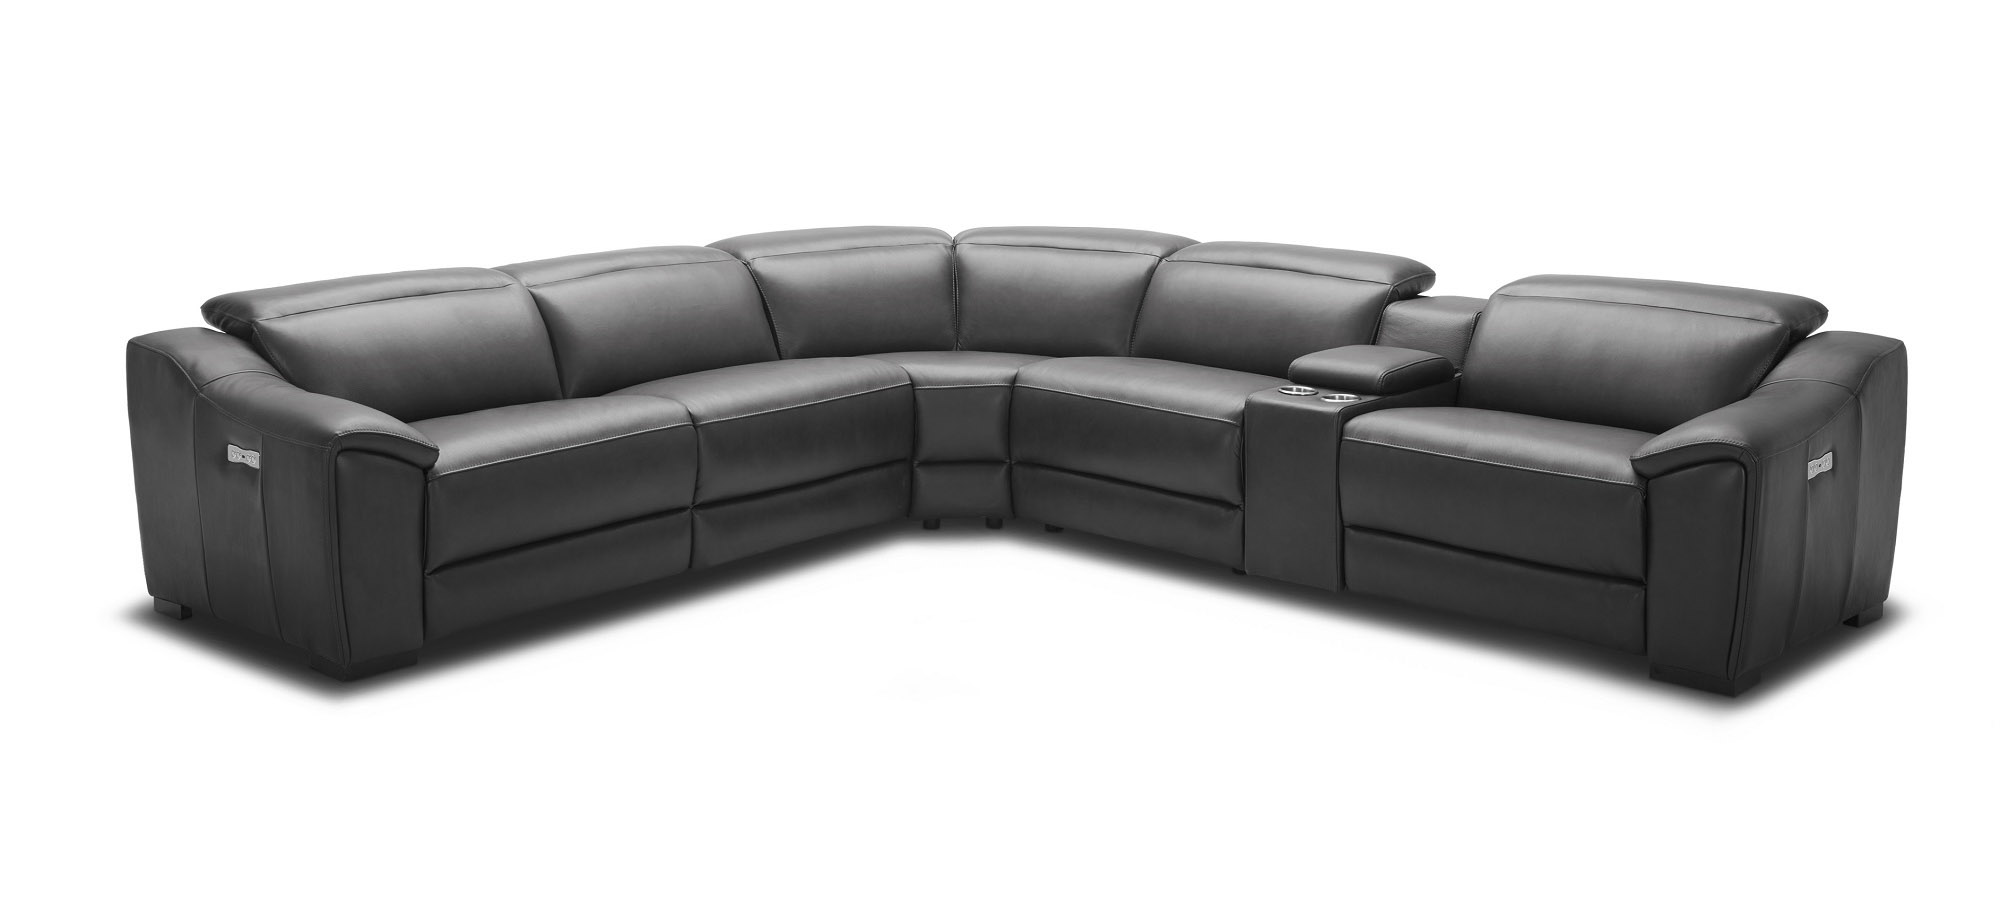 Dark Leather Tufted Design and Comfy Seats with Adjustable Headrest Sectional - Click Image to Close